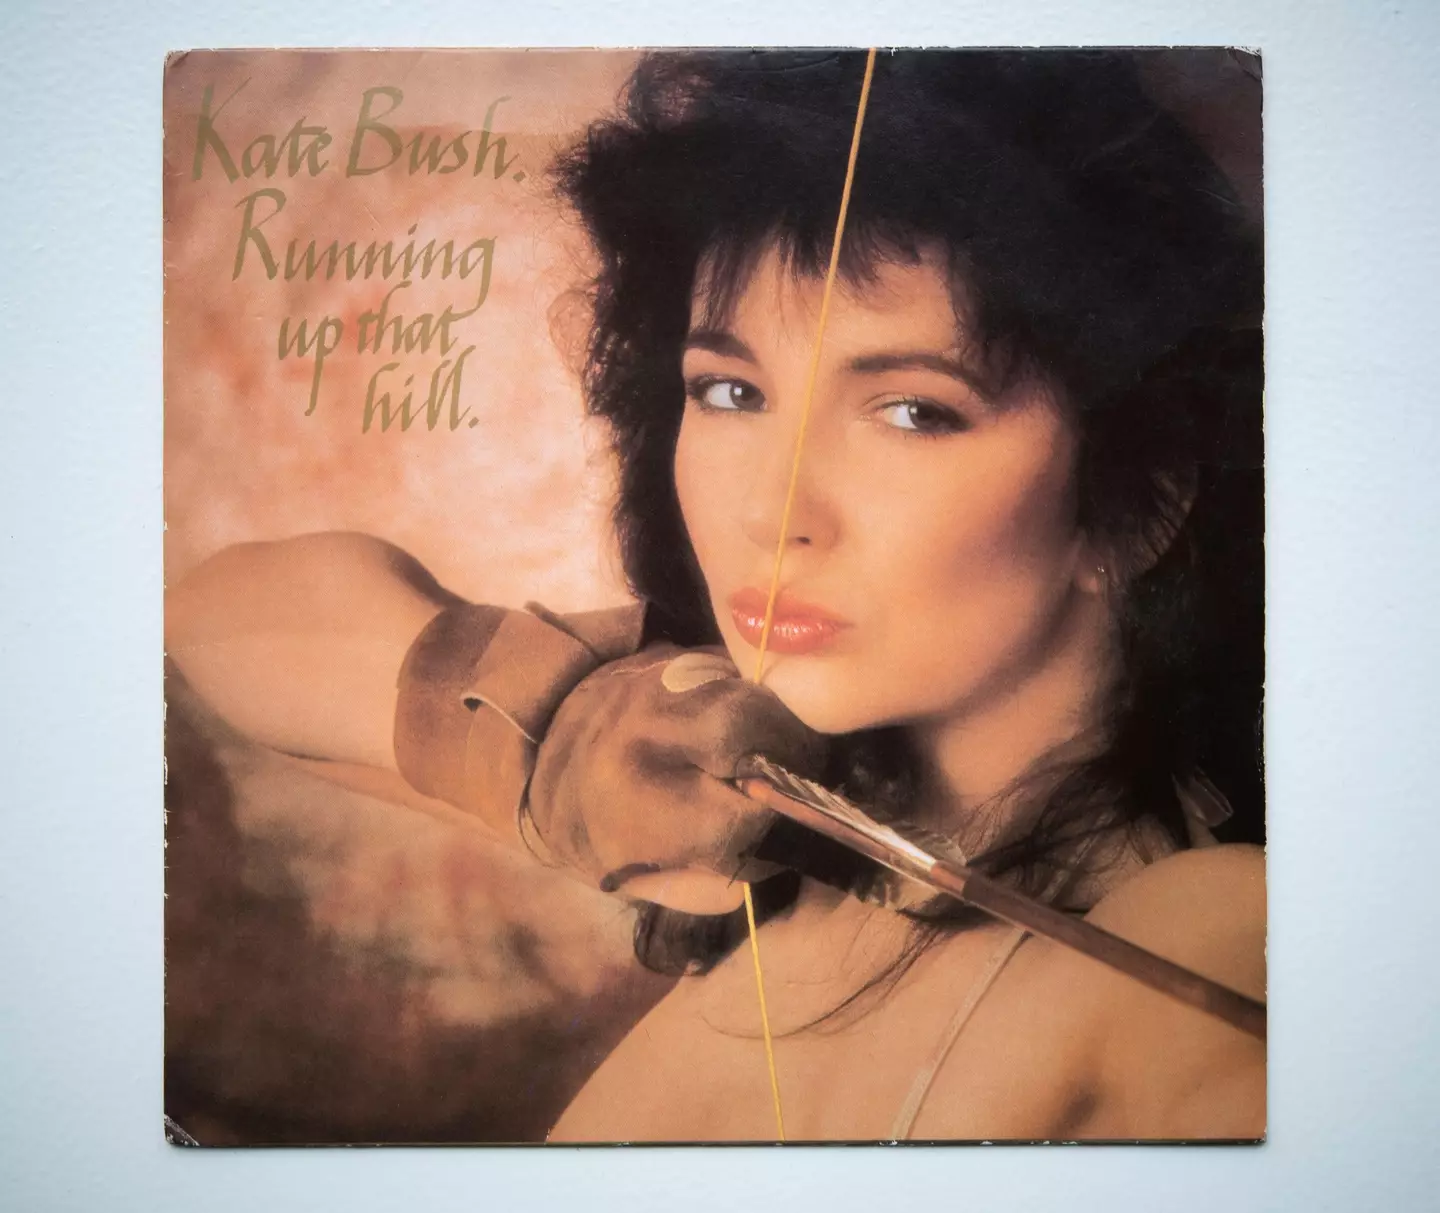 Kate Bush's 'Running Up That Hill' has shot to the top of the music charts after being used in Netflix series Stranger Things.